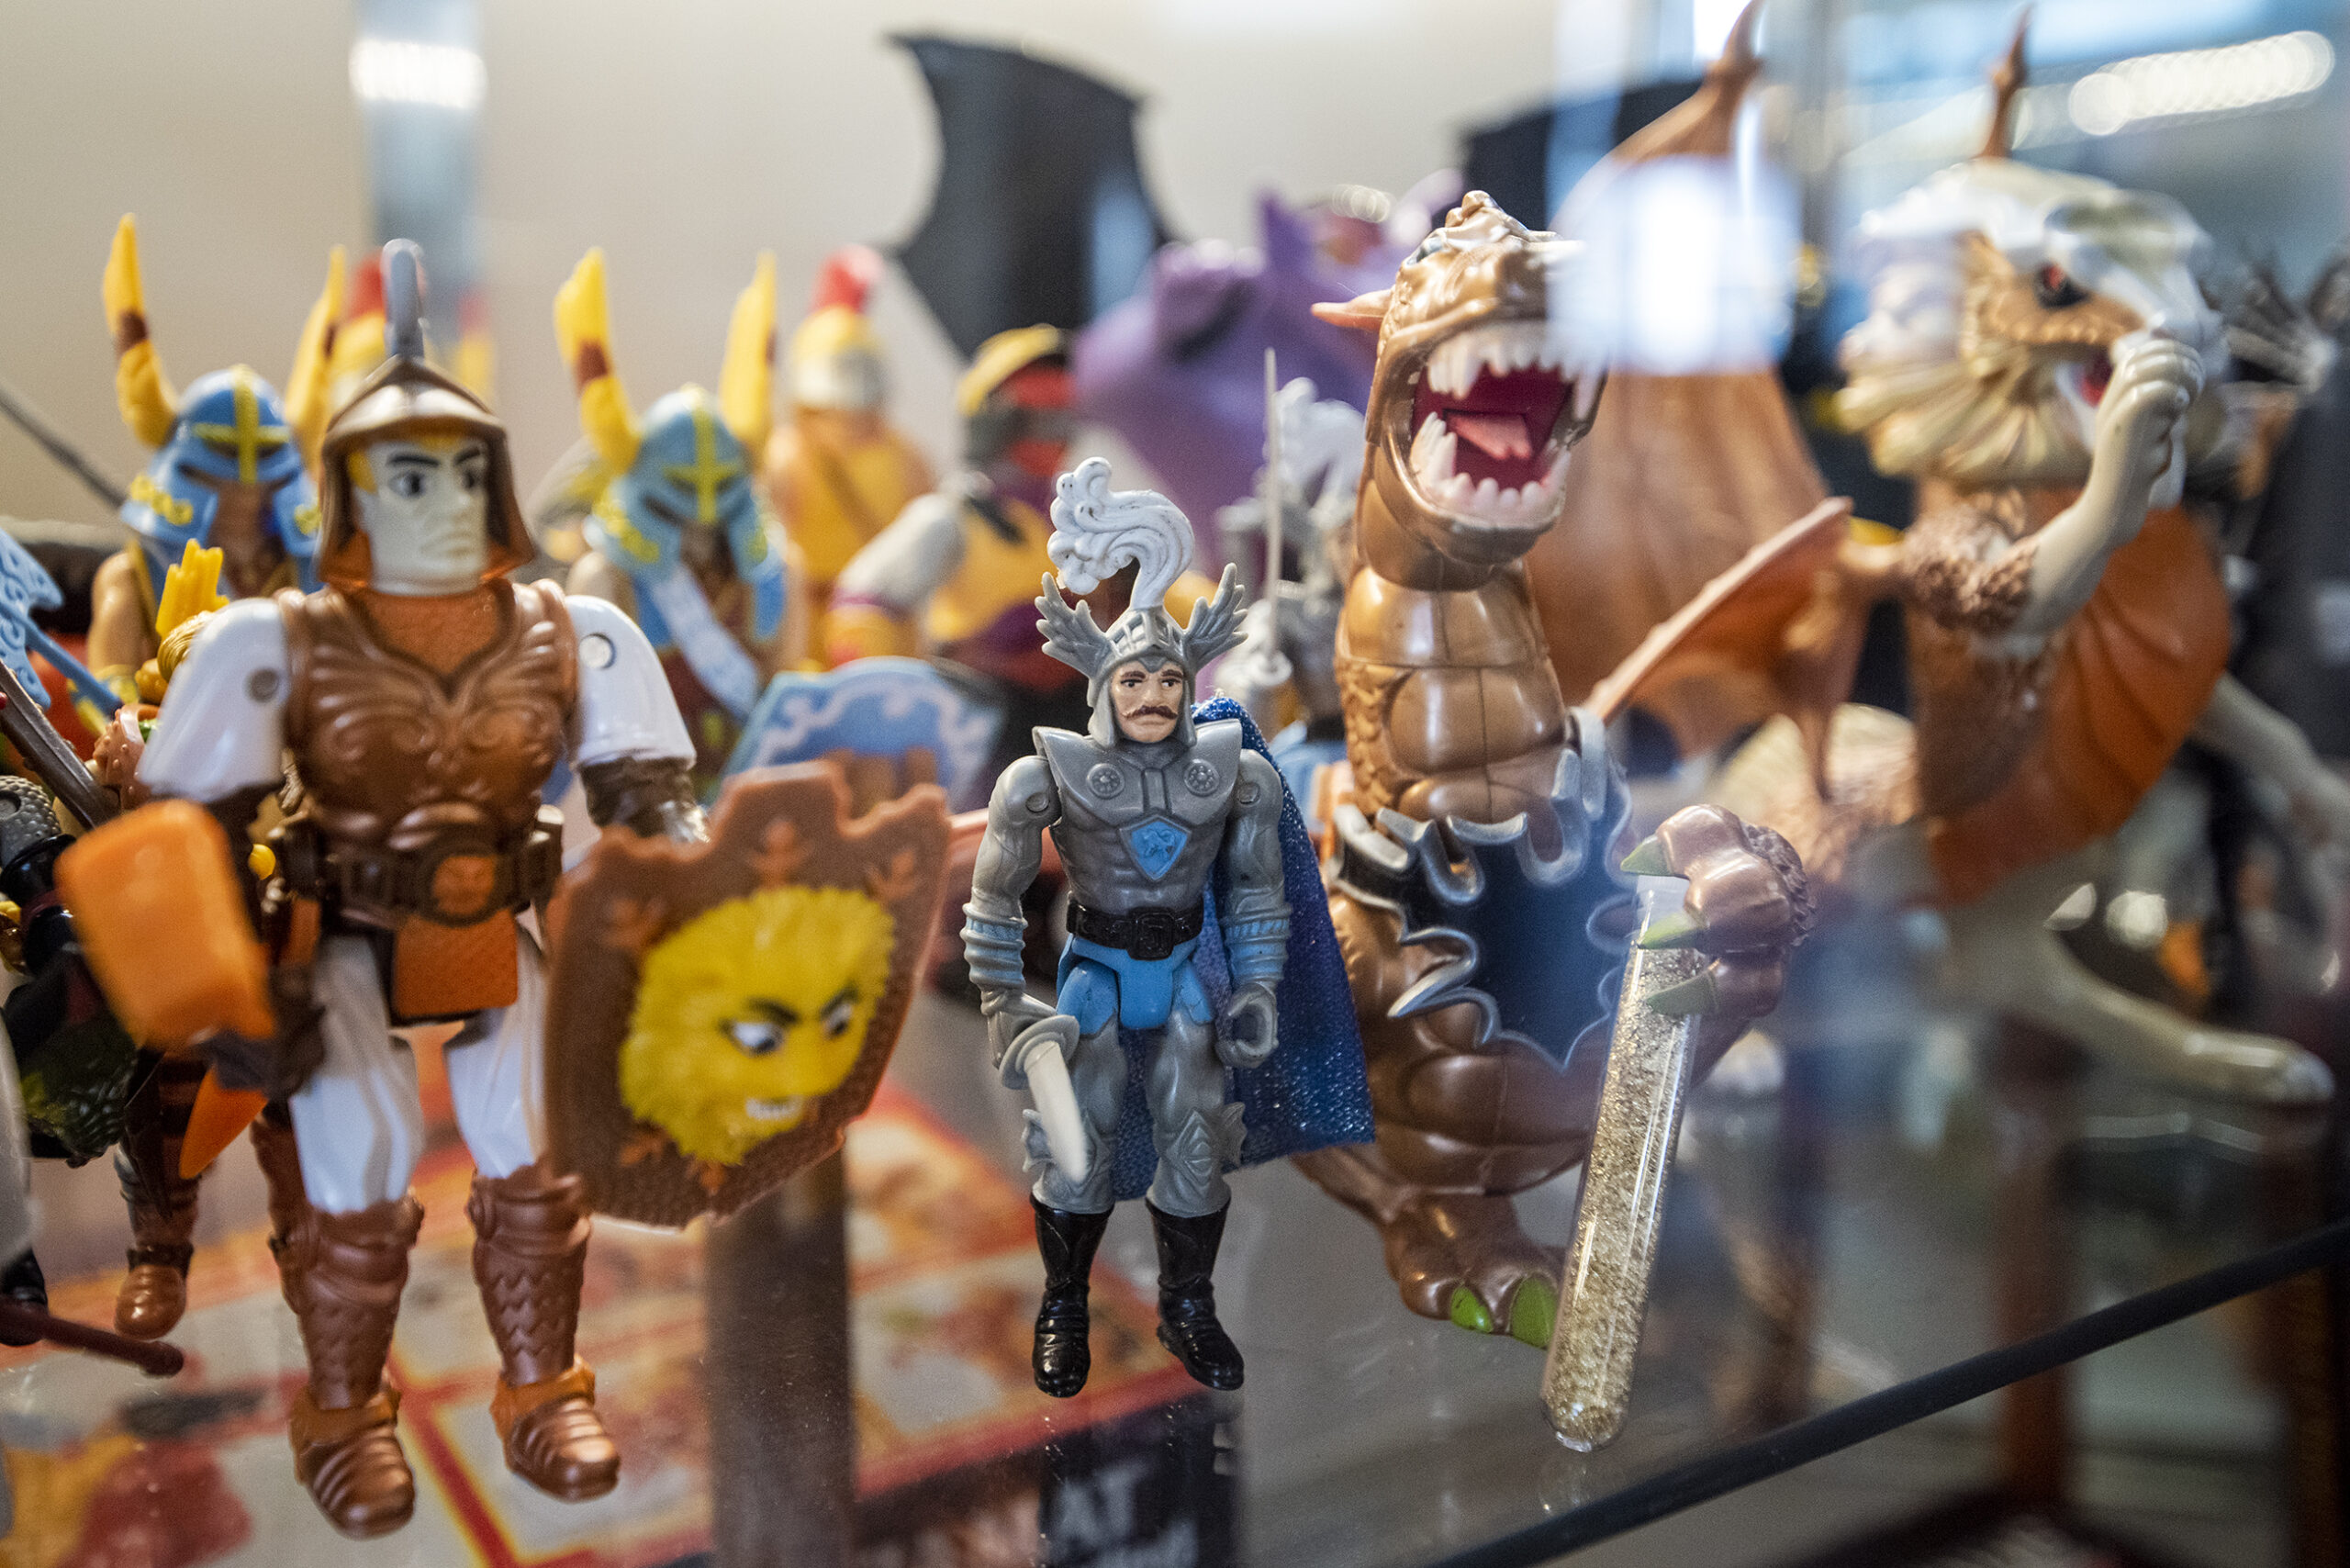 Colorful figurines depicting a man in armor and dragons.